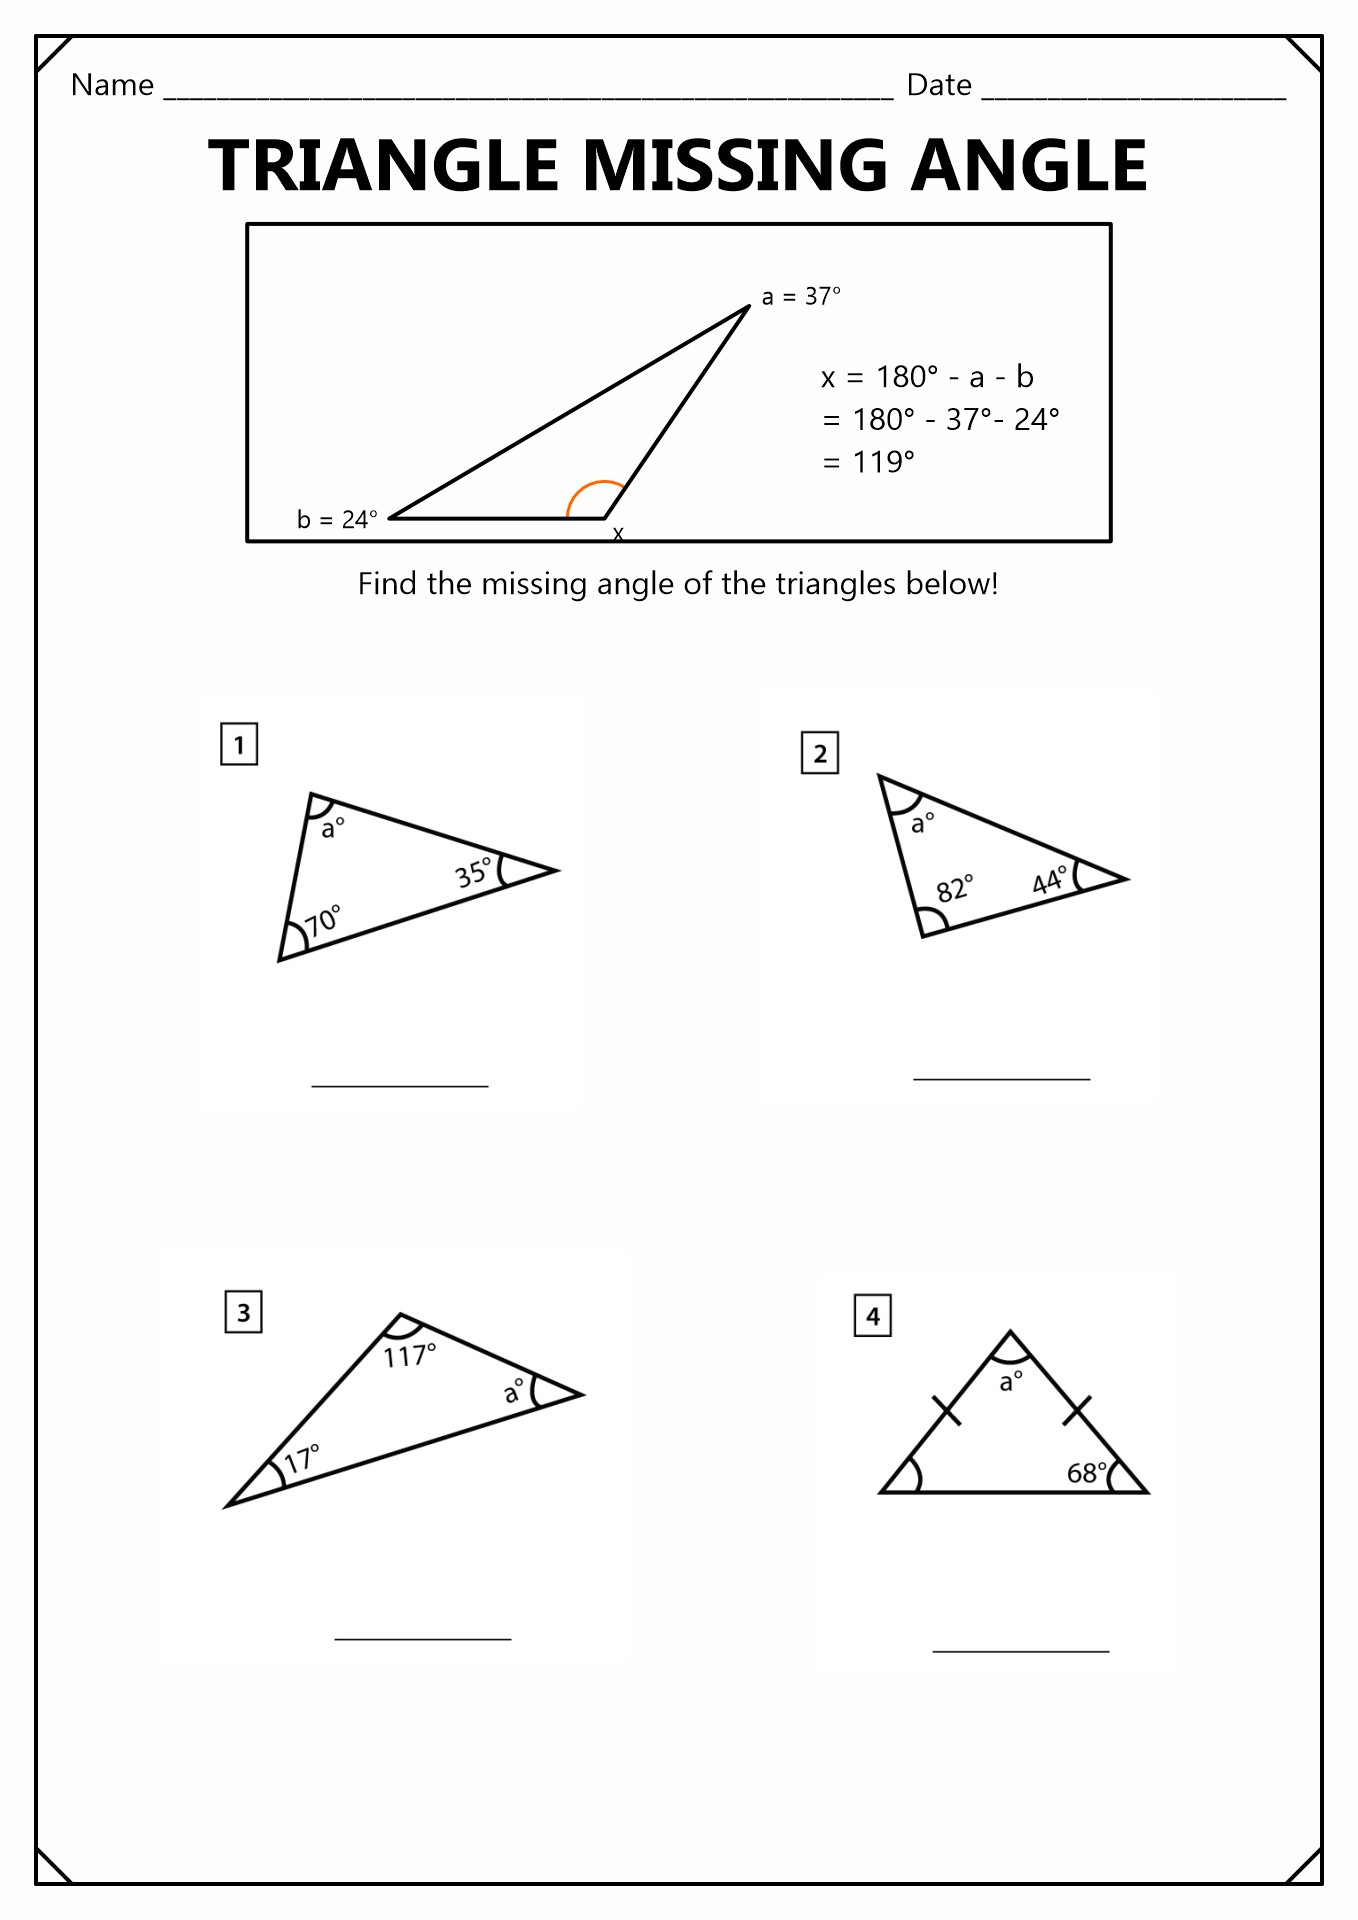 How to Find Missing Angle Measures